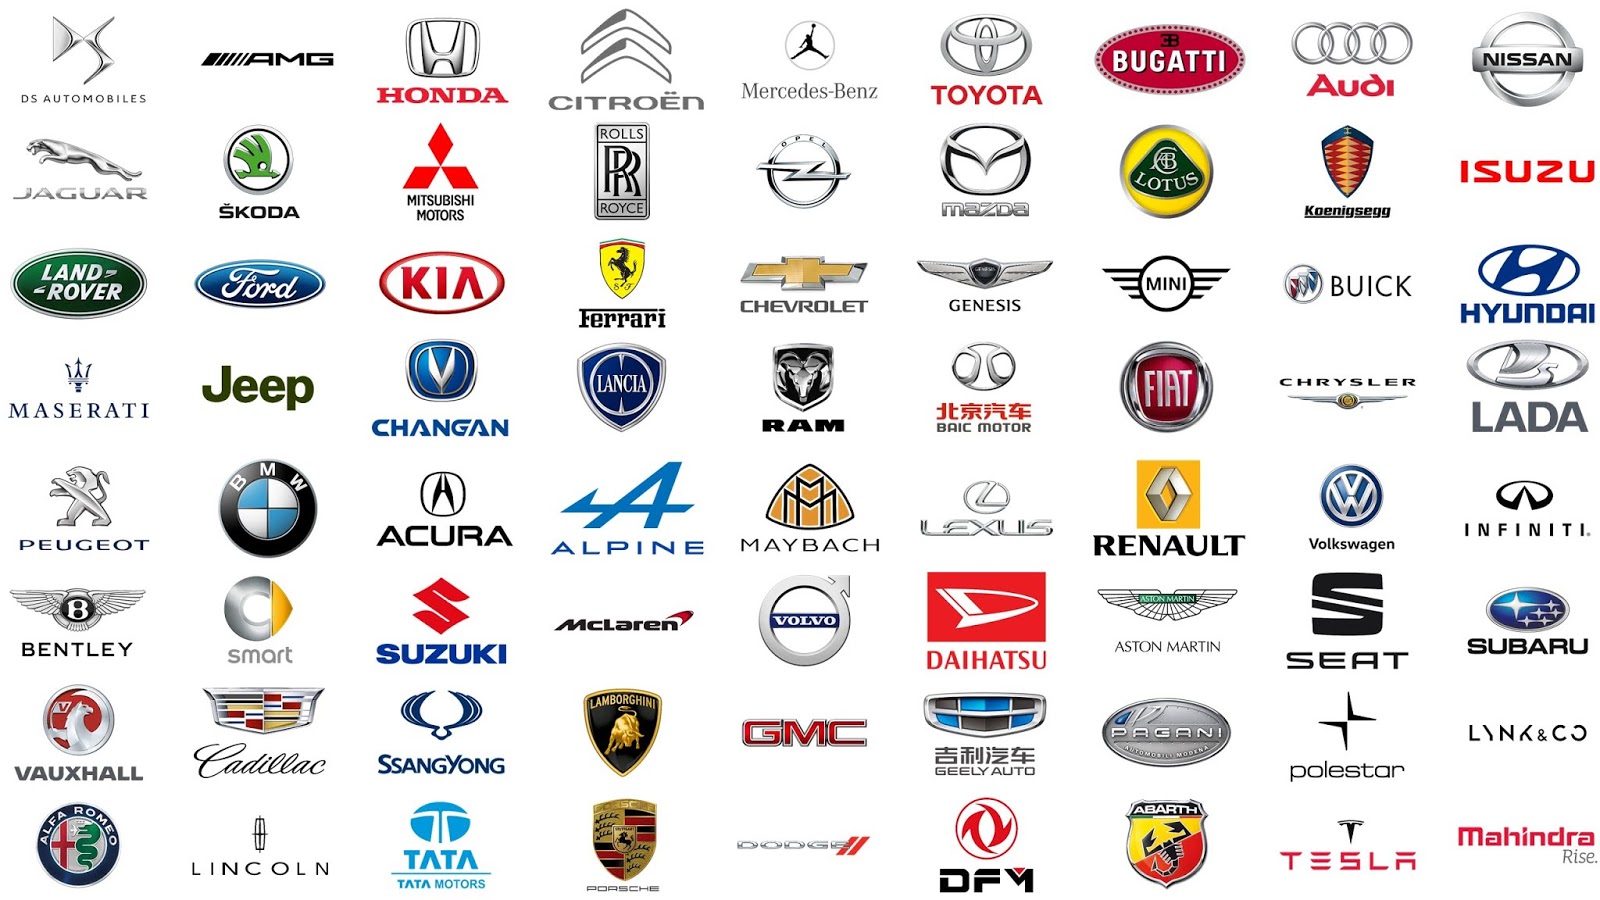 The World of Cars How Many Car Brands Are There in the World?